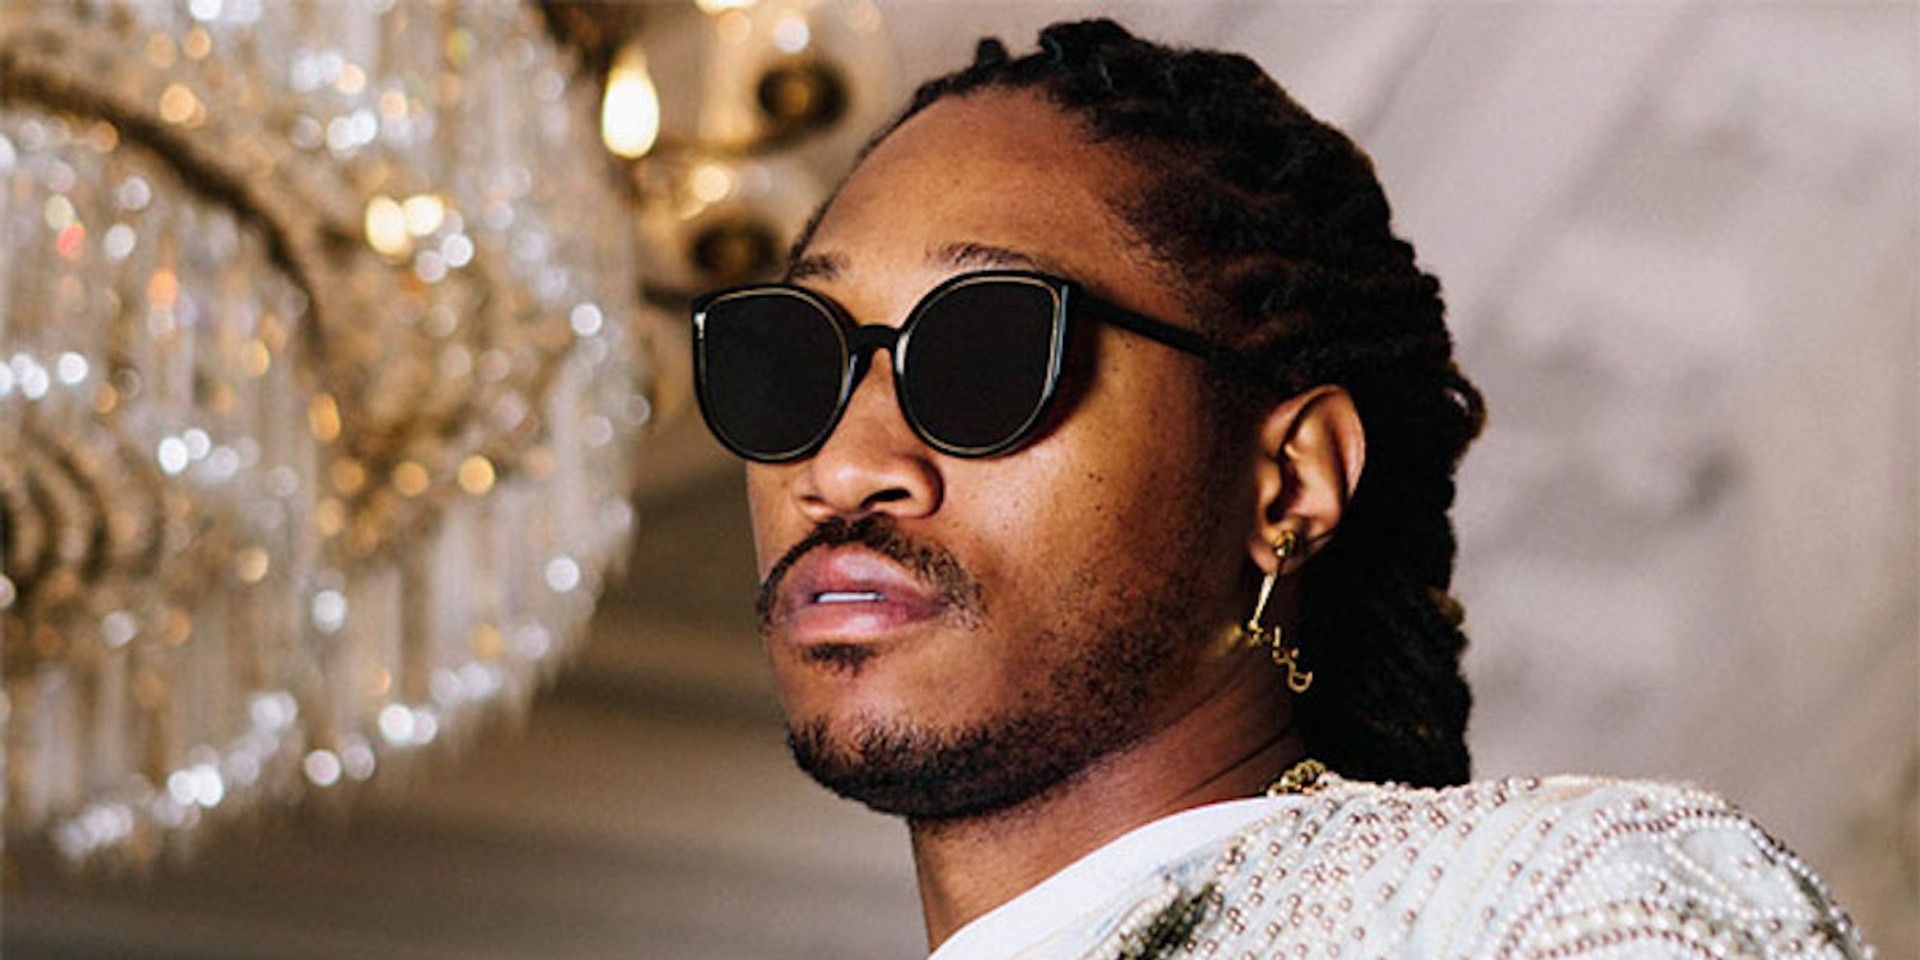 BREAKING: Future's Singapore show has been cancelled